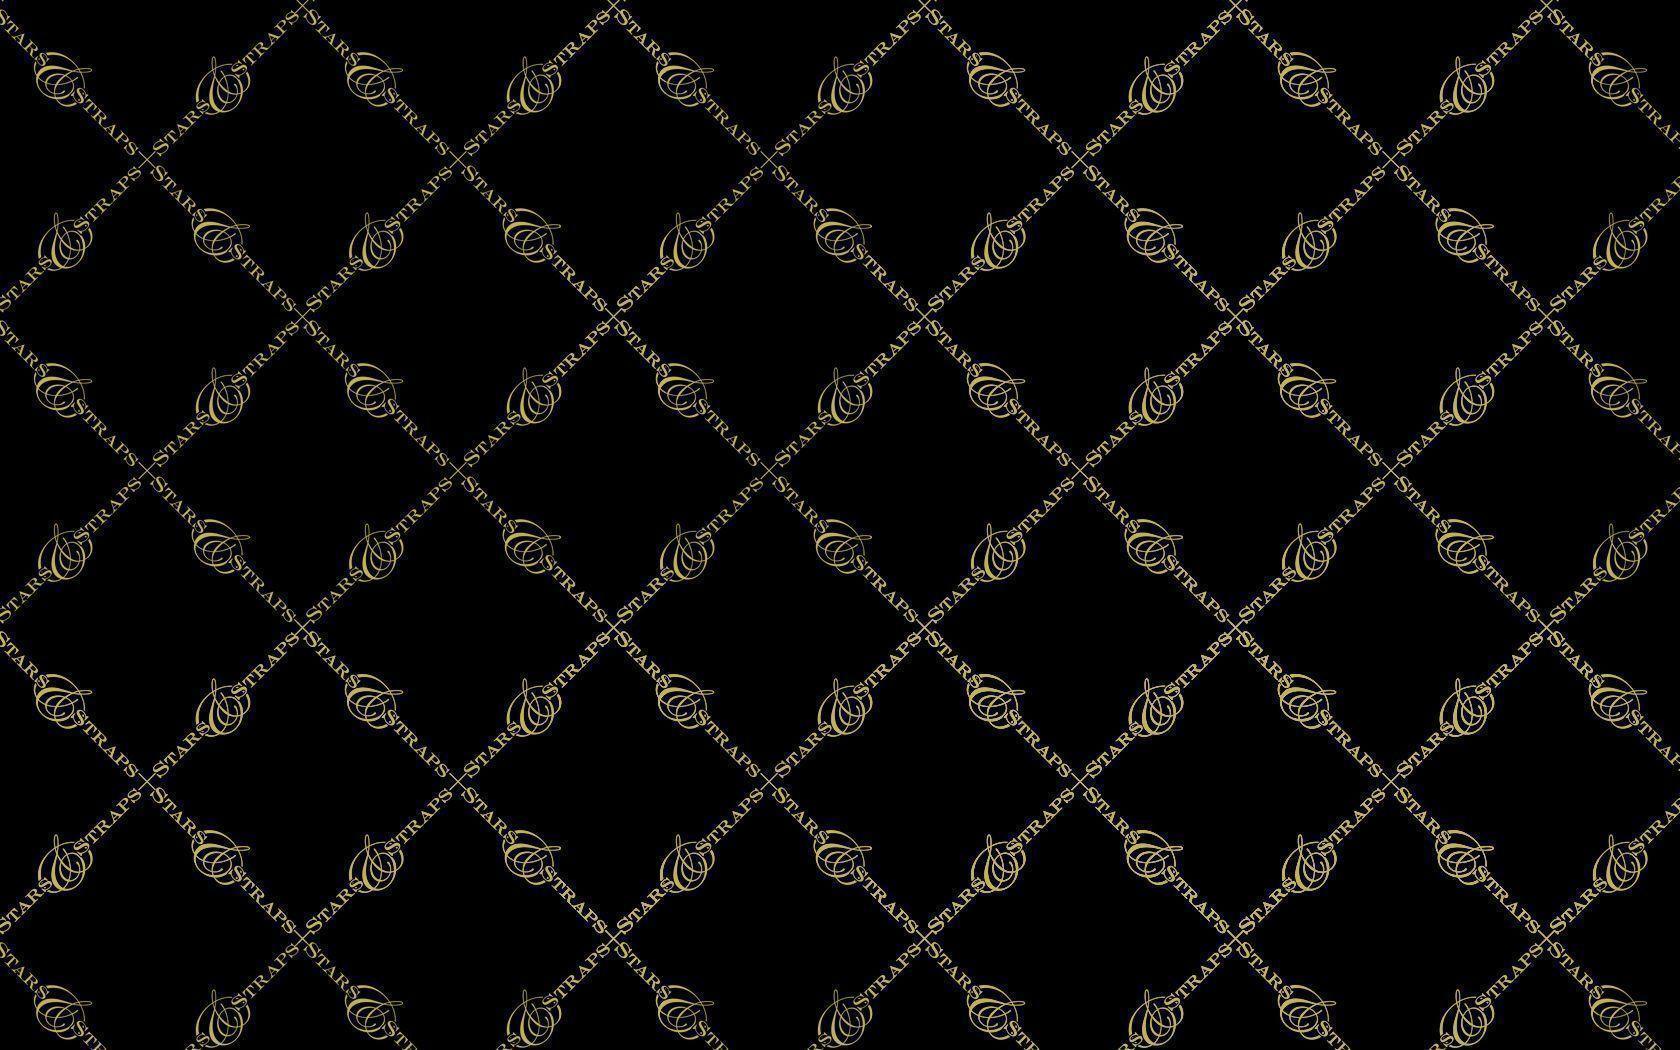 Free gold and black famous logo wallpaper free gold and black